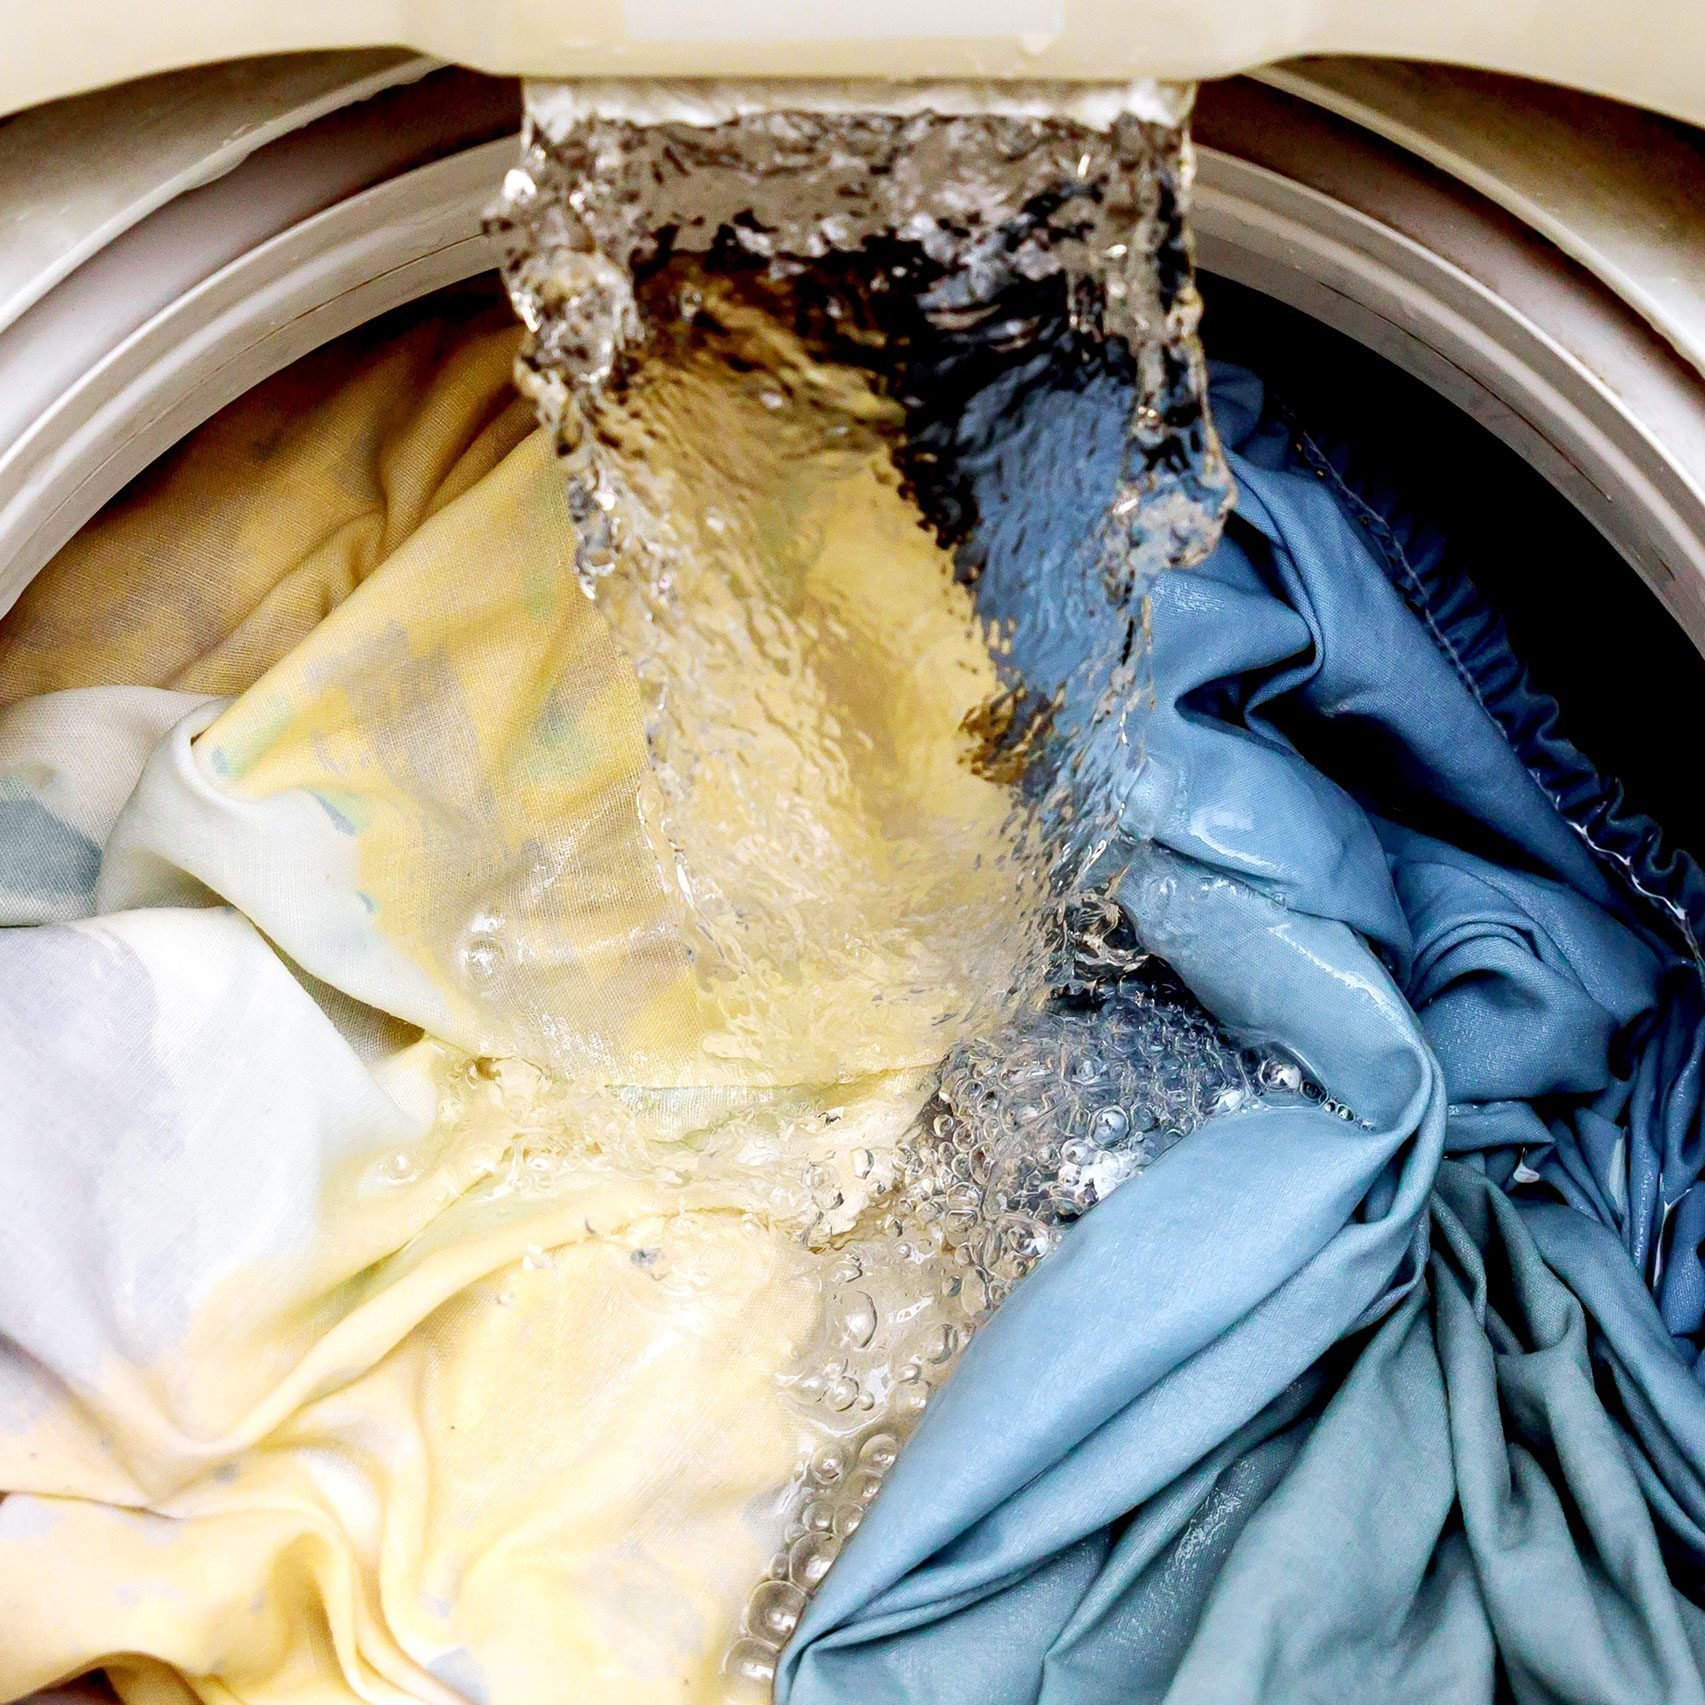 How to Wash Your Laundry at the Right Temperature